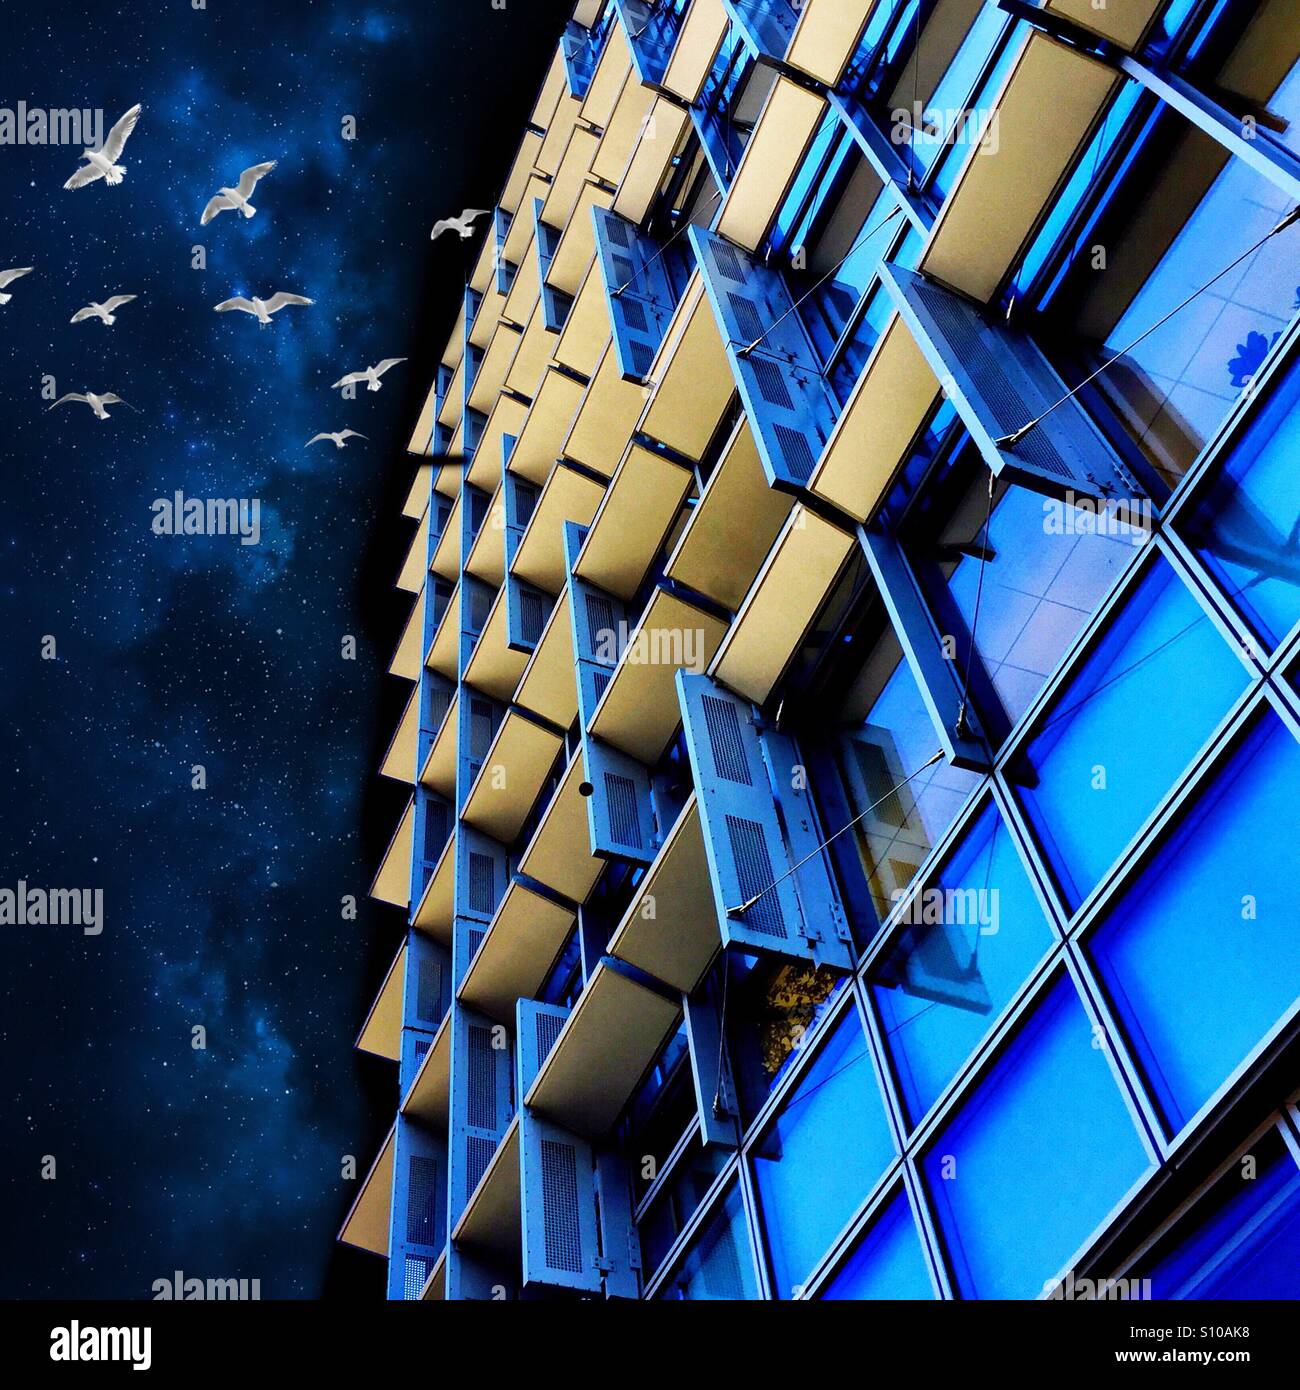 An abstract digital art of an office building with birds flying from it across a night sky. Stock Photo